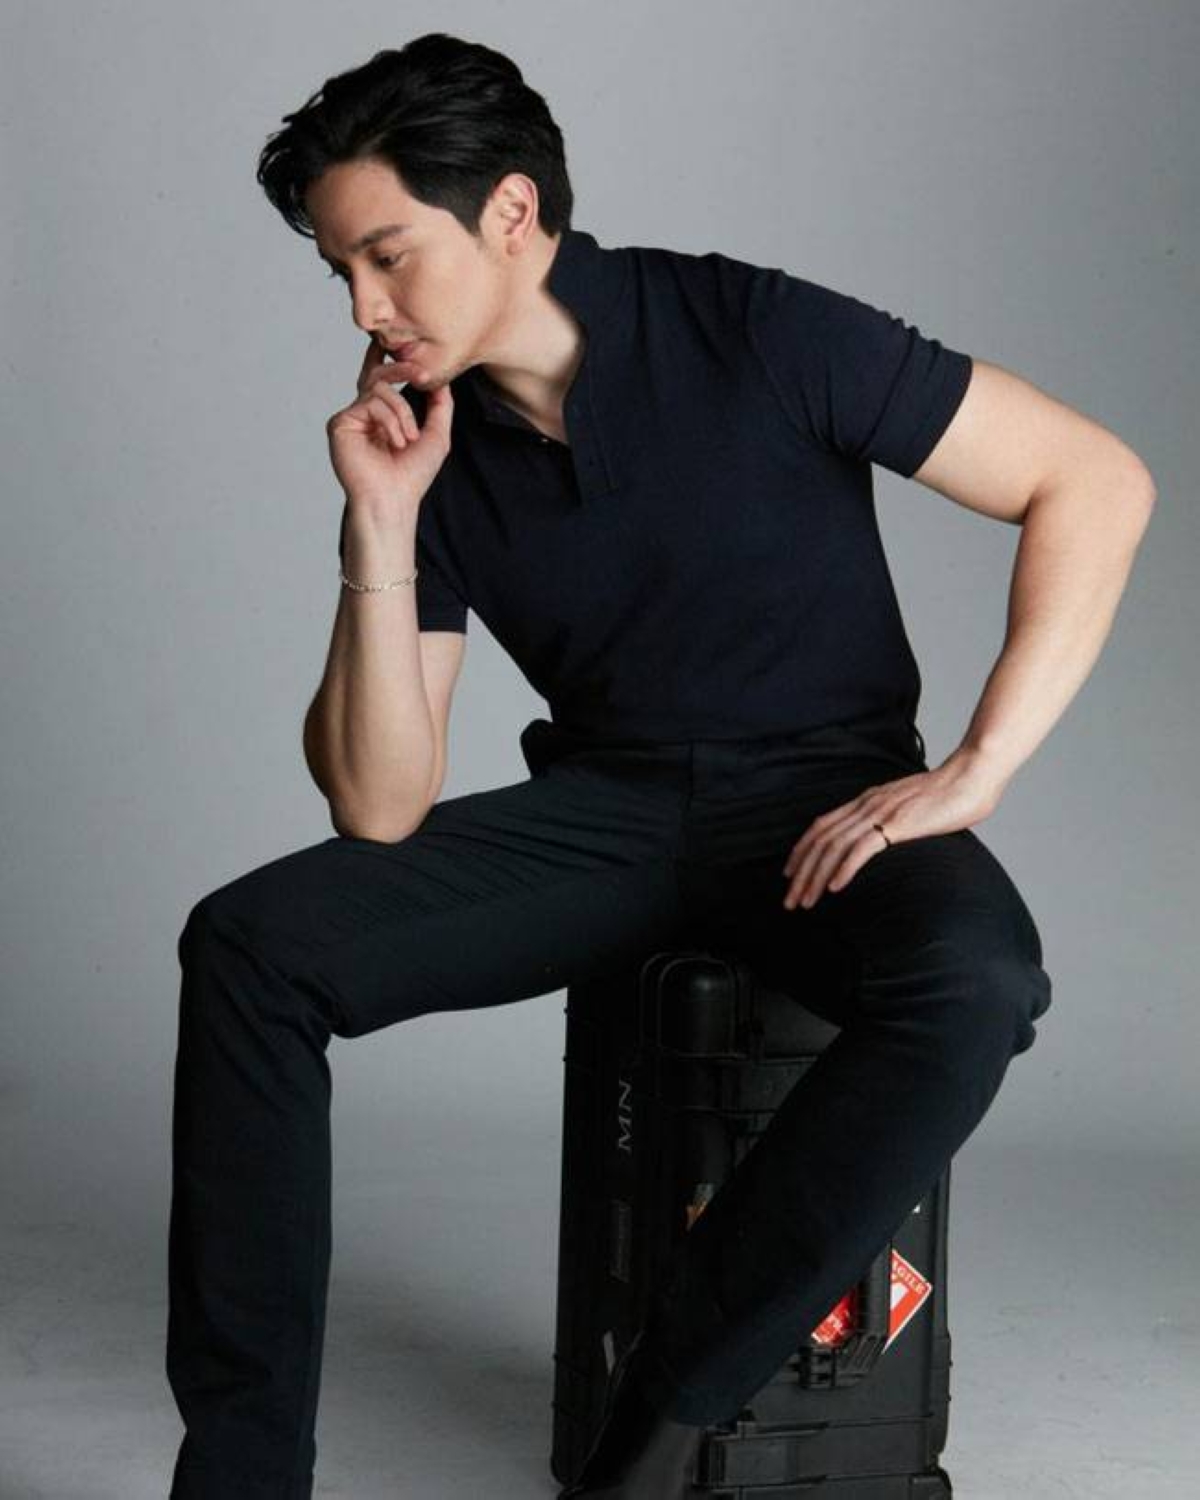 Despite being one of the country’s biggest stars, Alden Richards admits that he has experienced feelings of worthlessness before. INSTAGRAM PHOTO/ALDENRICHARDS02